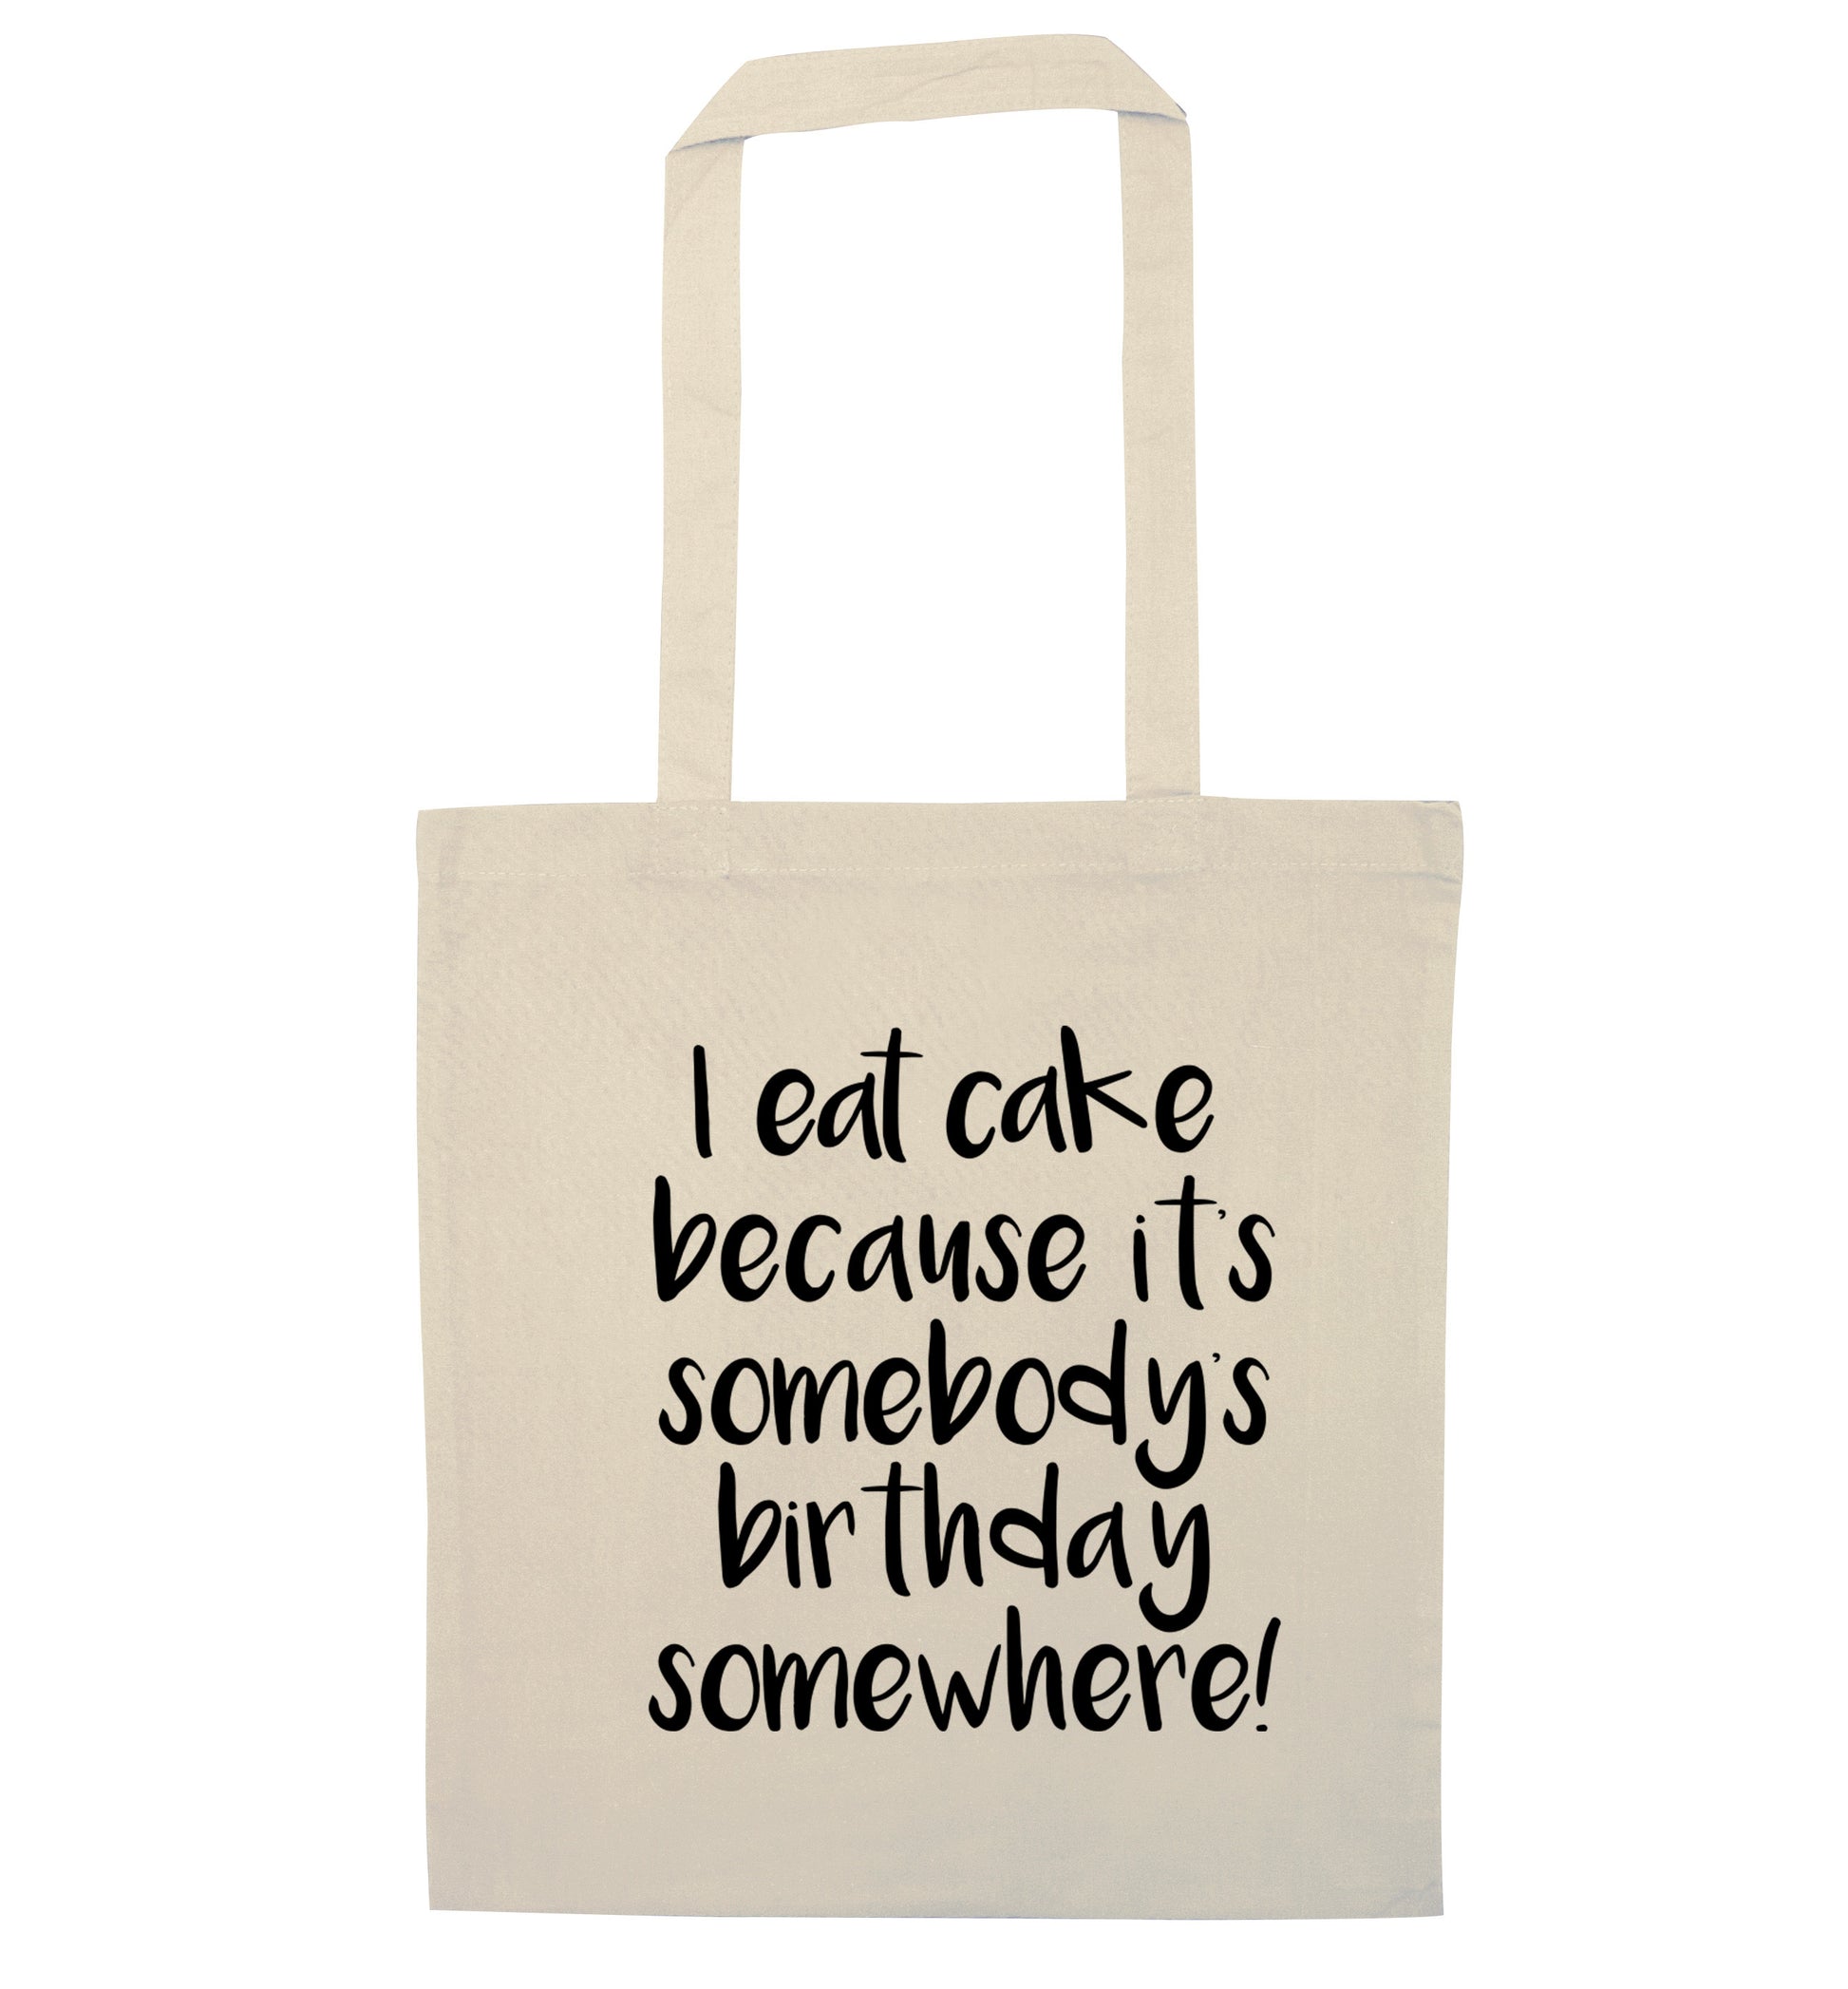 I eat cake because it's somebody's birthday somewhere! natural tote bag